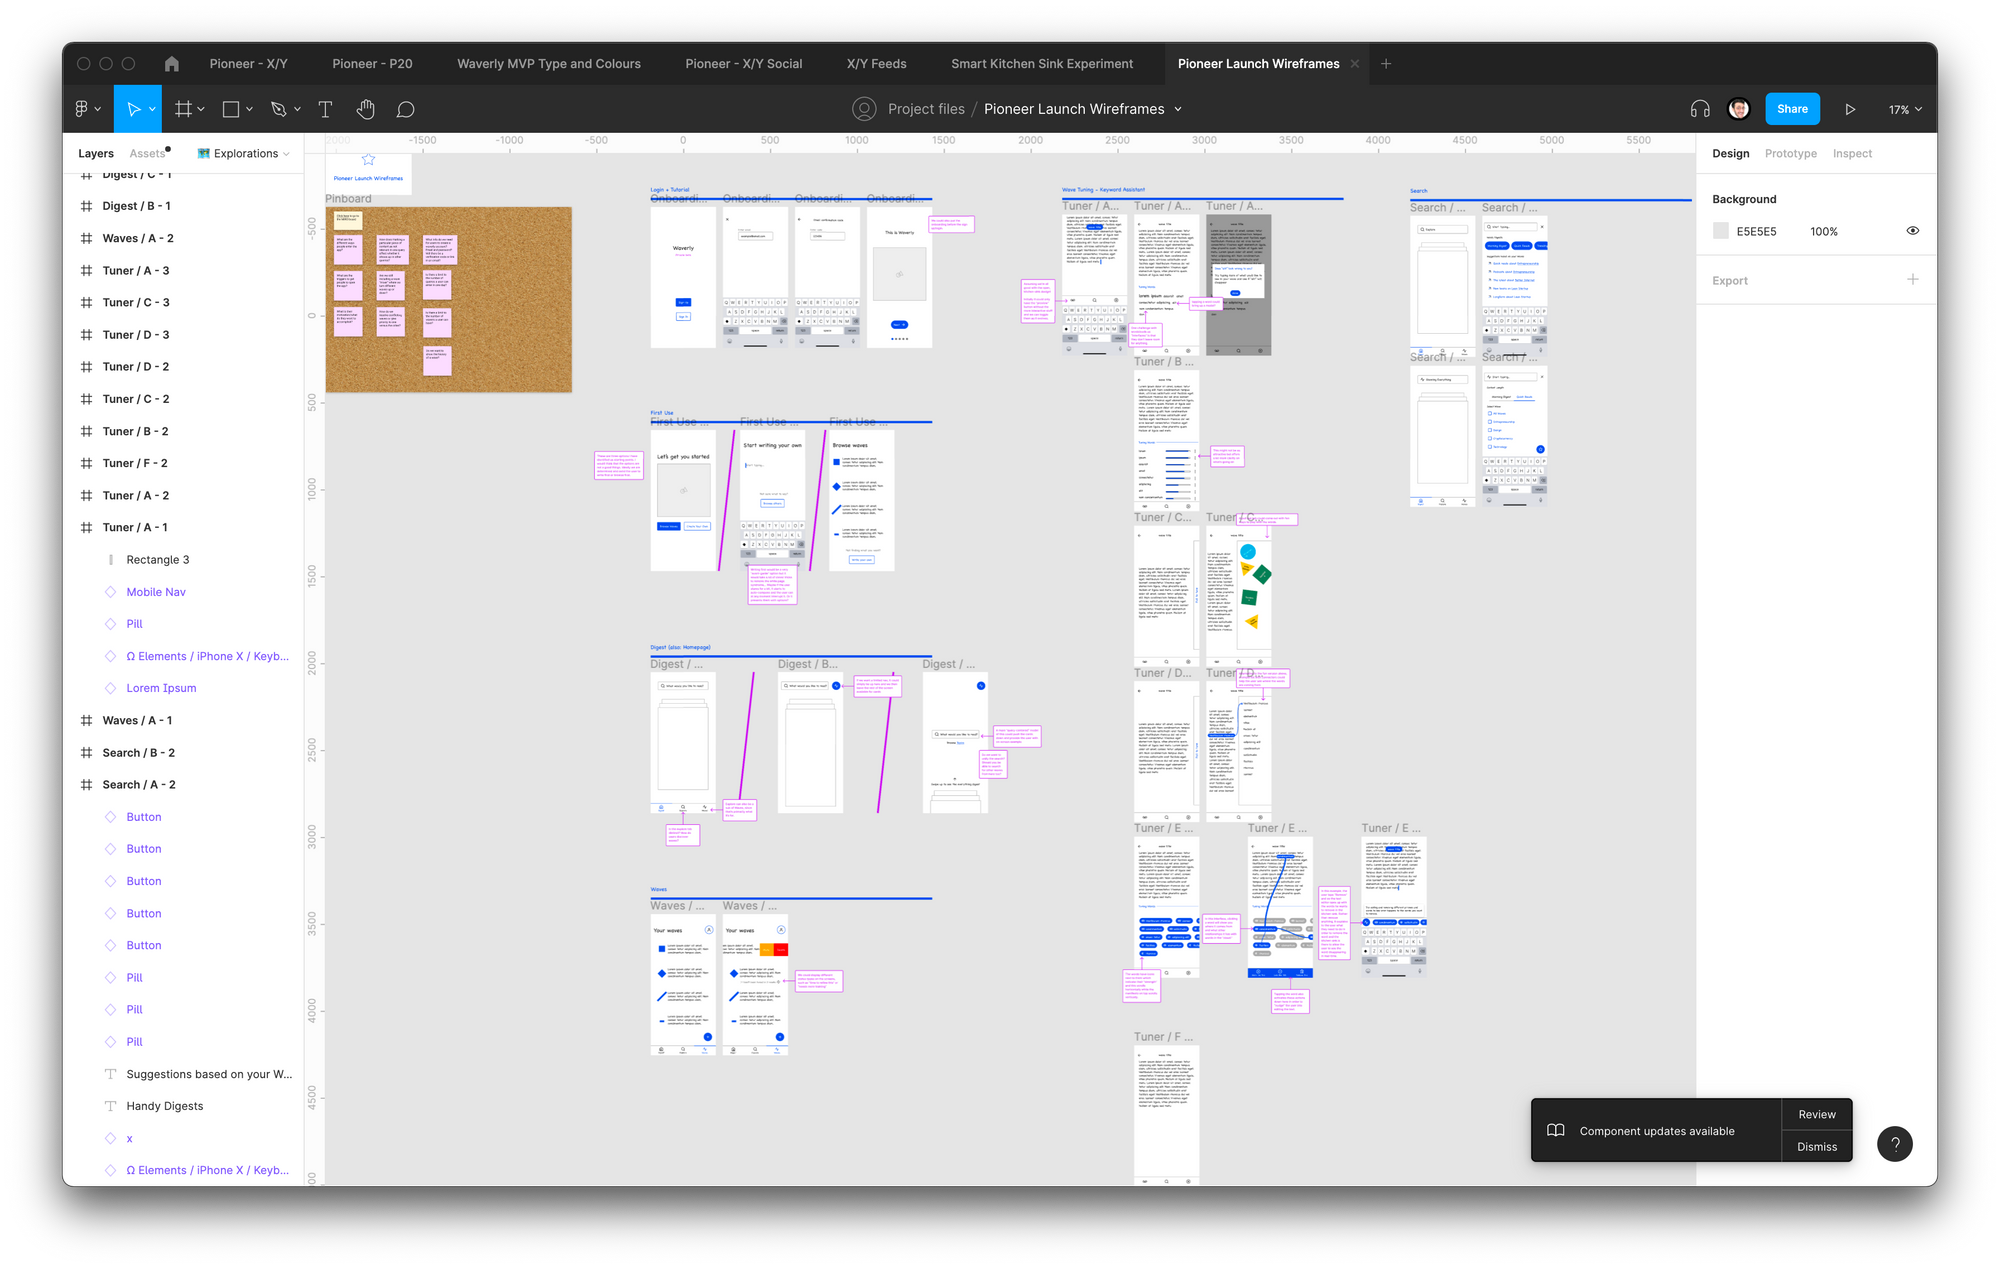 Iterating on the userflow through wireframes and lo-fi prototypes.